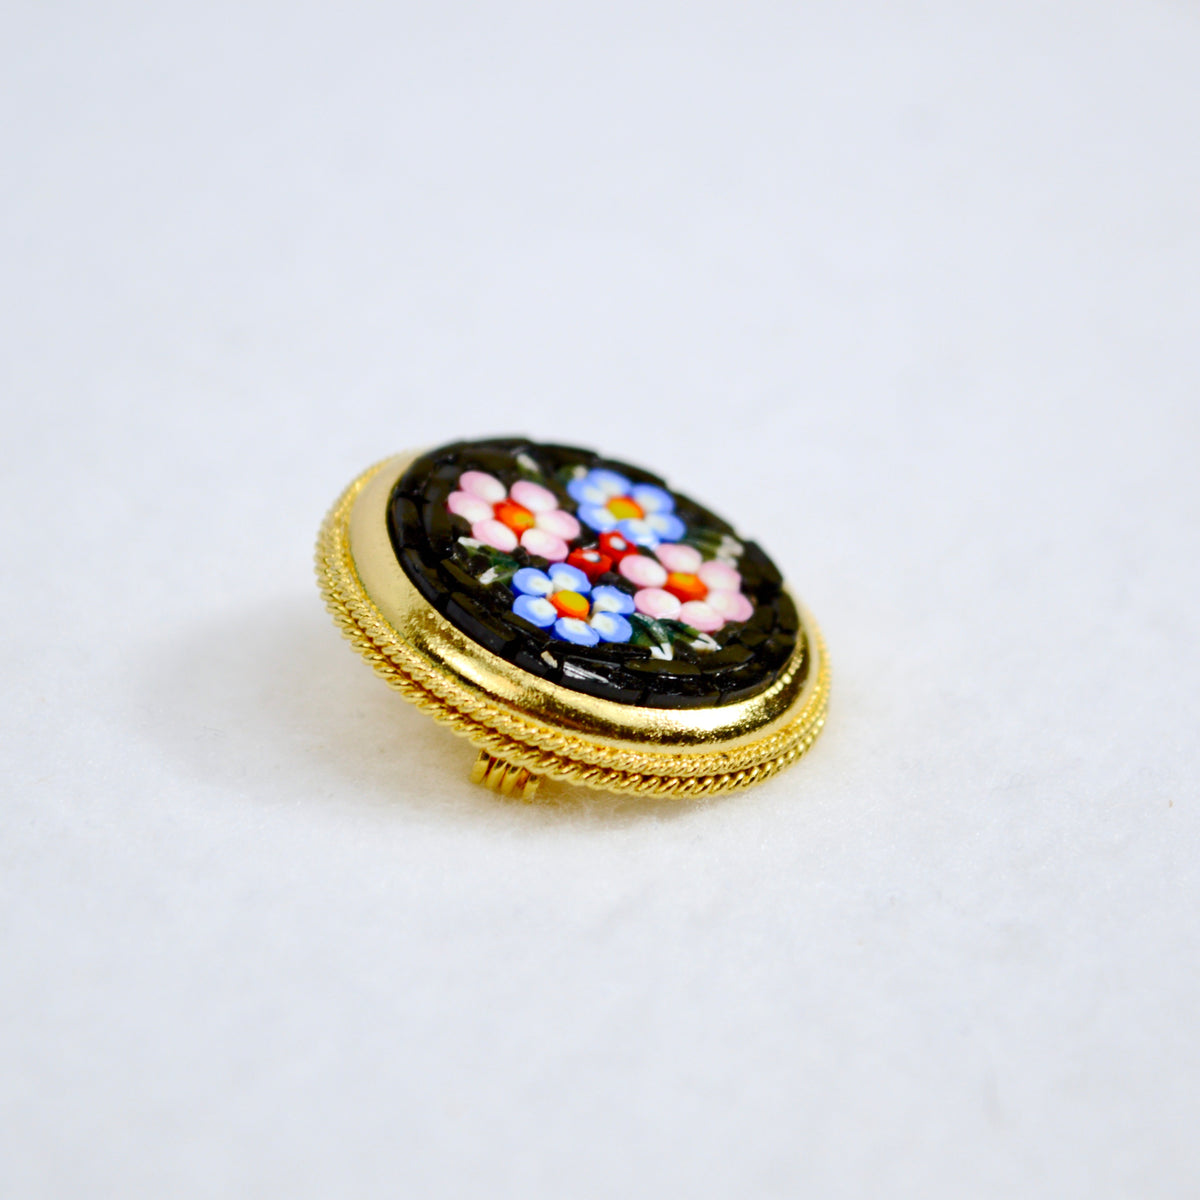 Florentine Mosaic Round Brooch, Lapel Pin, Made in Italy - My Italian Decor